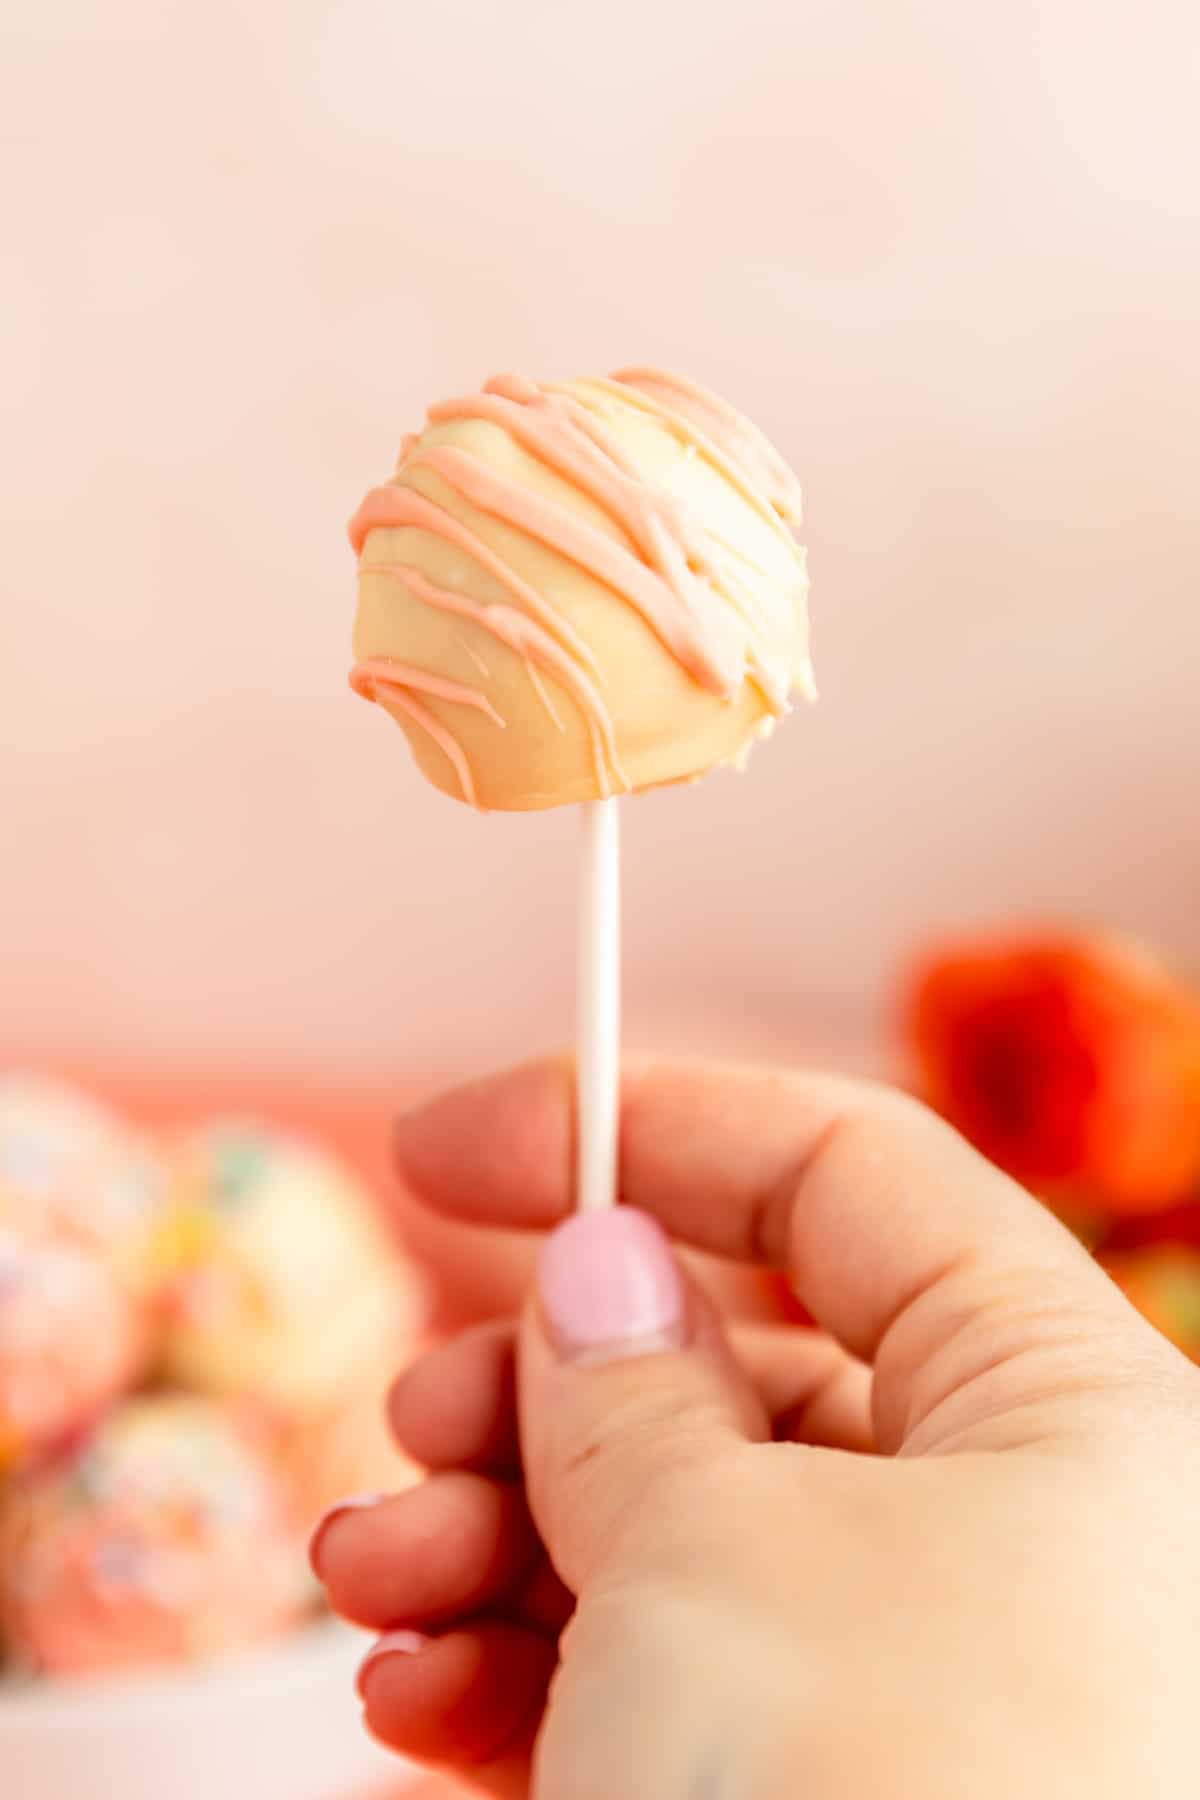 A hand holding a cookie dough lollipop decorated in white and pink chocolate..